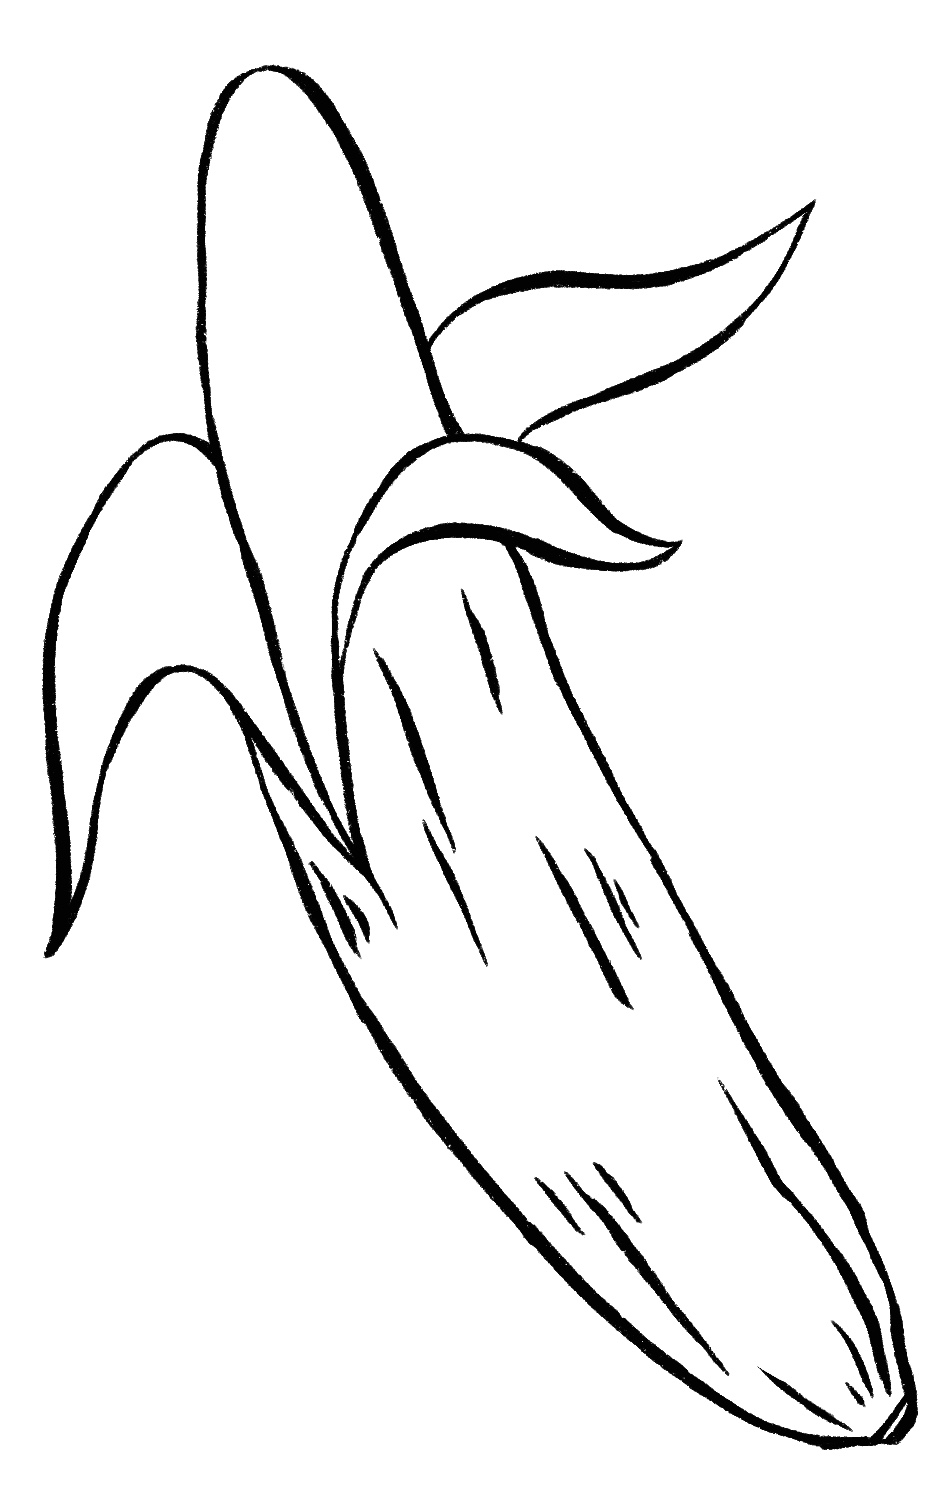 Pair Of Banana Is Shown In A Black And White Drawing, Coloring Page Banana  PNG Transparent Image and Clipart for Free Download